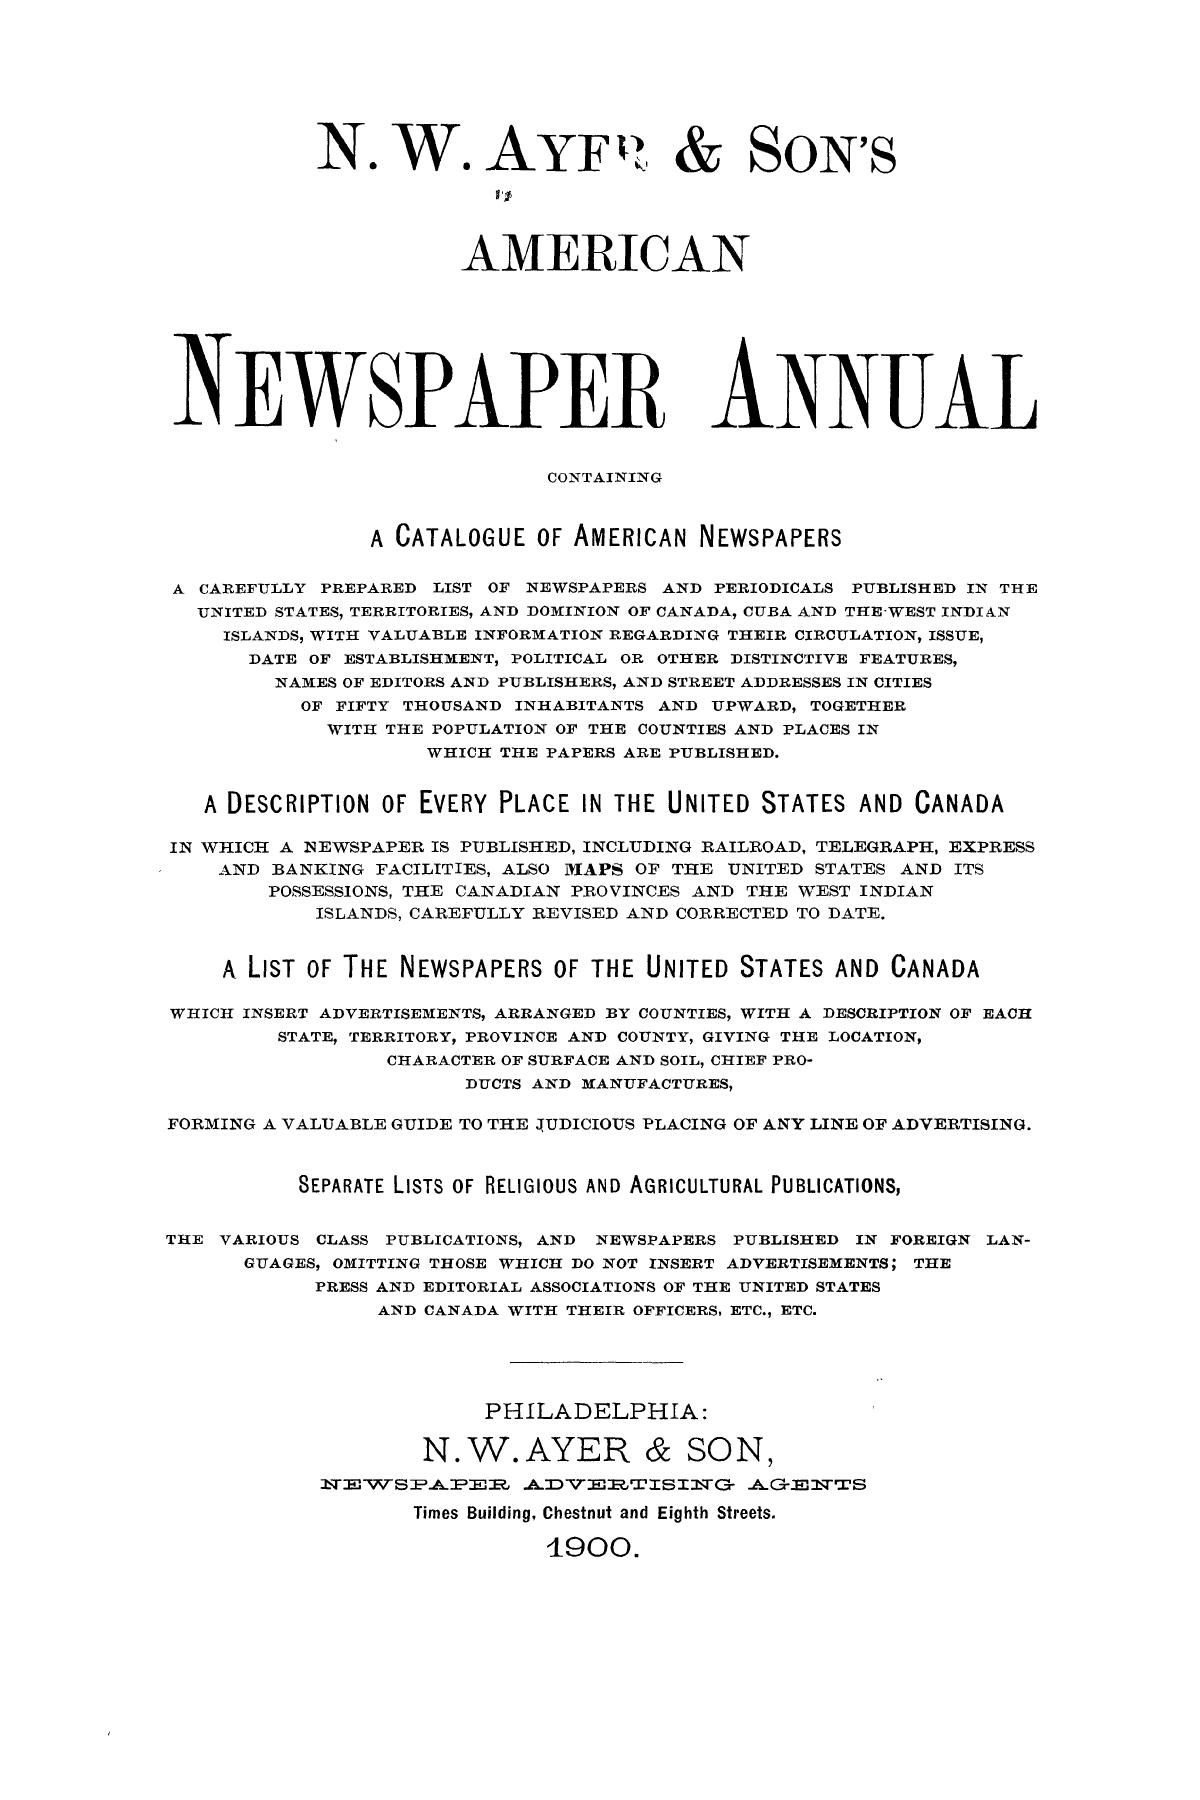 N. W. Ayer & Son's American Newspaper Annual: containing a Catalogue of American Newspapers, a List of All Newspapers of the United States and Canada, 1900, Volume 2
                                                
                                                    Title Page
                                                